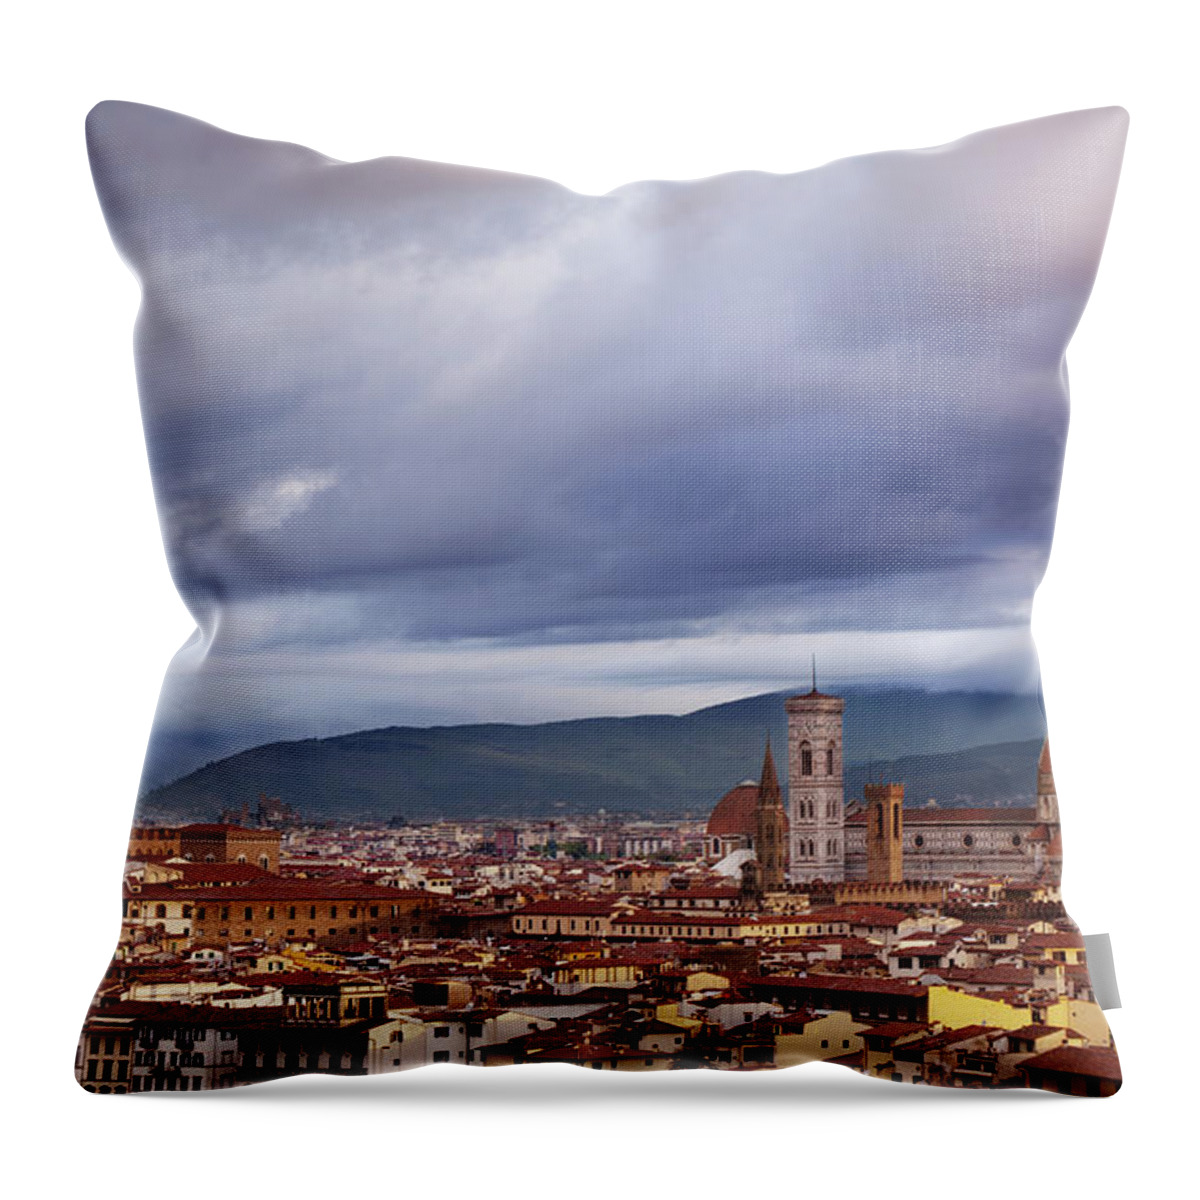 Scenics Throw Pillow featuring the photograph Florence, Santa Maria Del Fiore by Deimagine